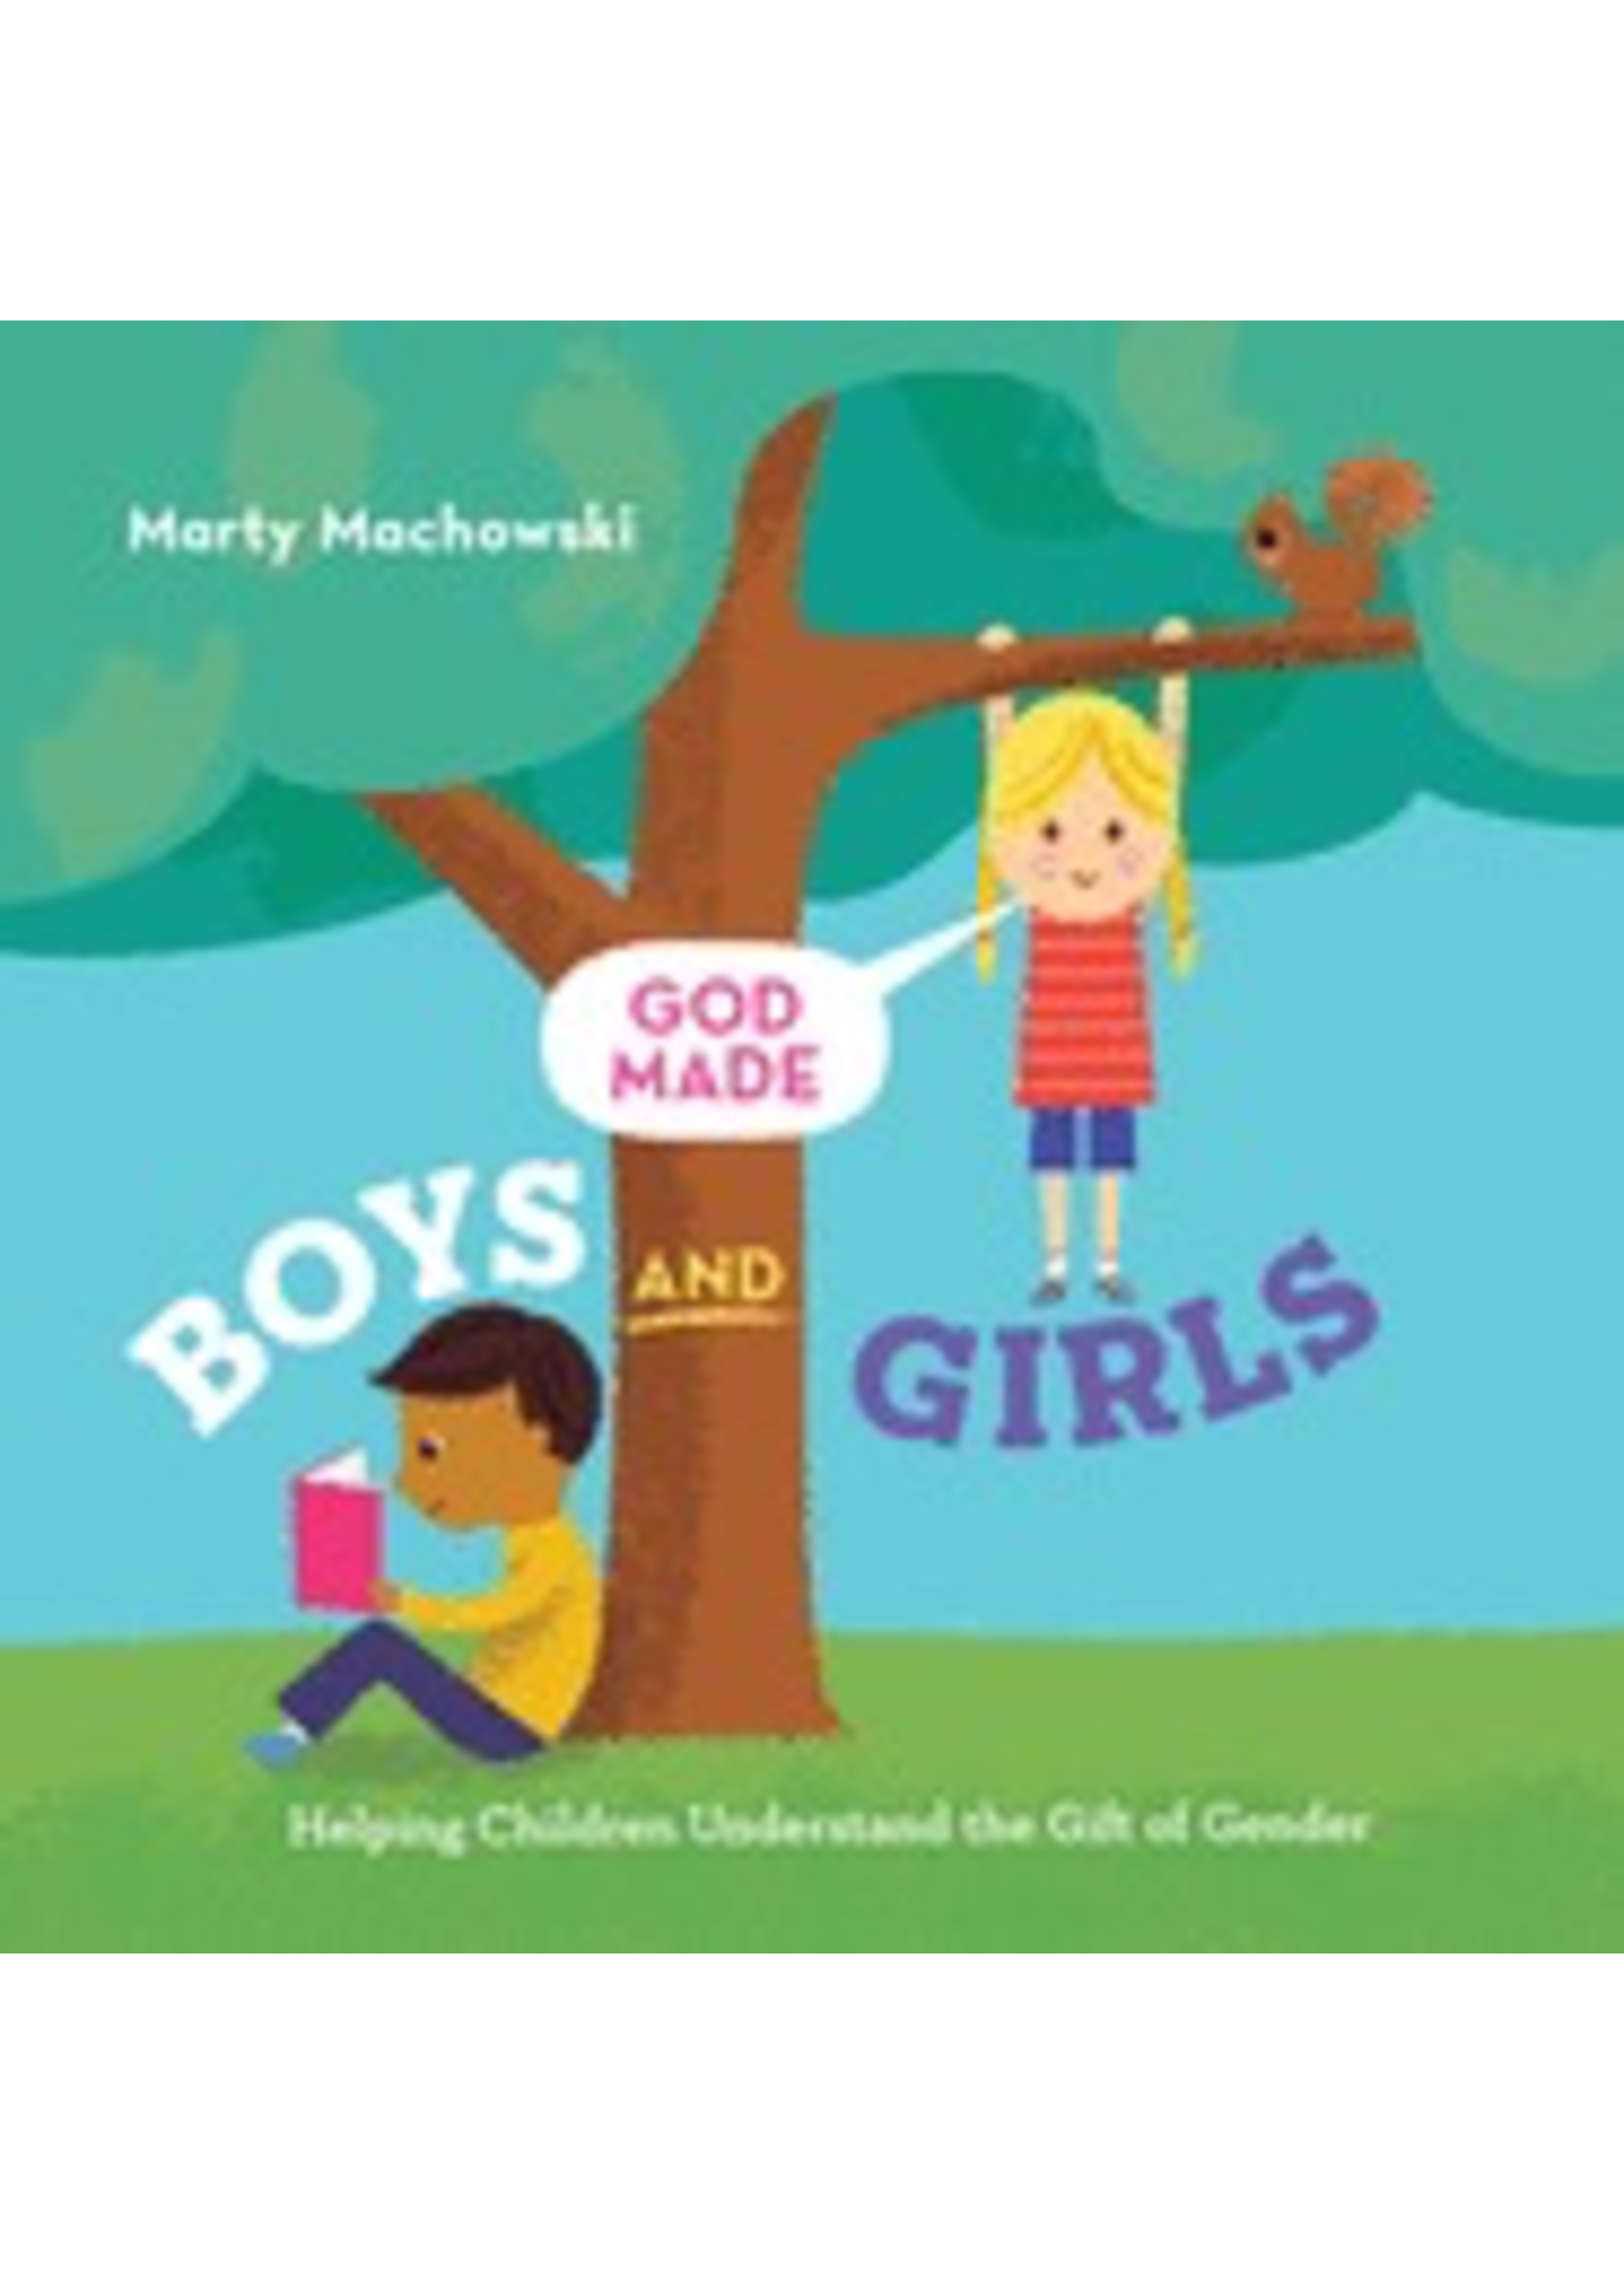 Machowski, Marty God Made Boys and Girls: Helping Children Understand the Gift of Gender